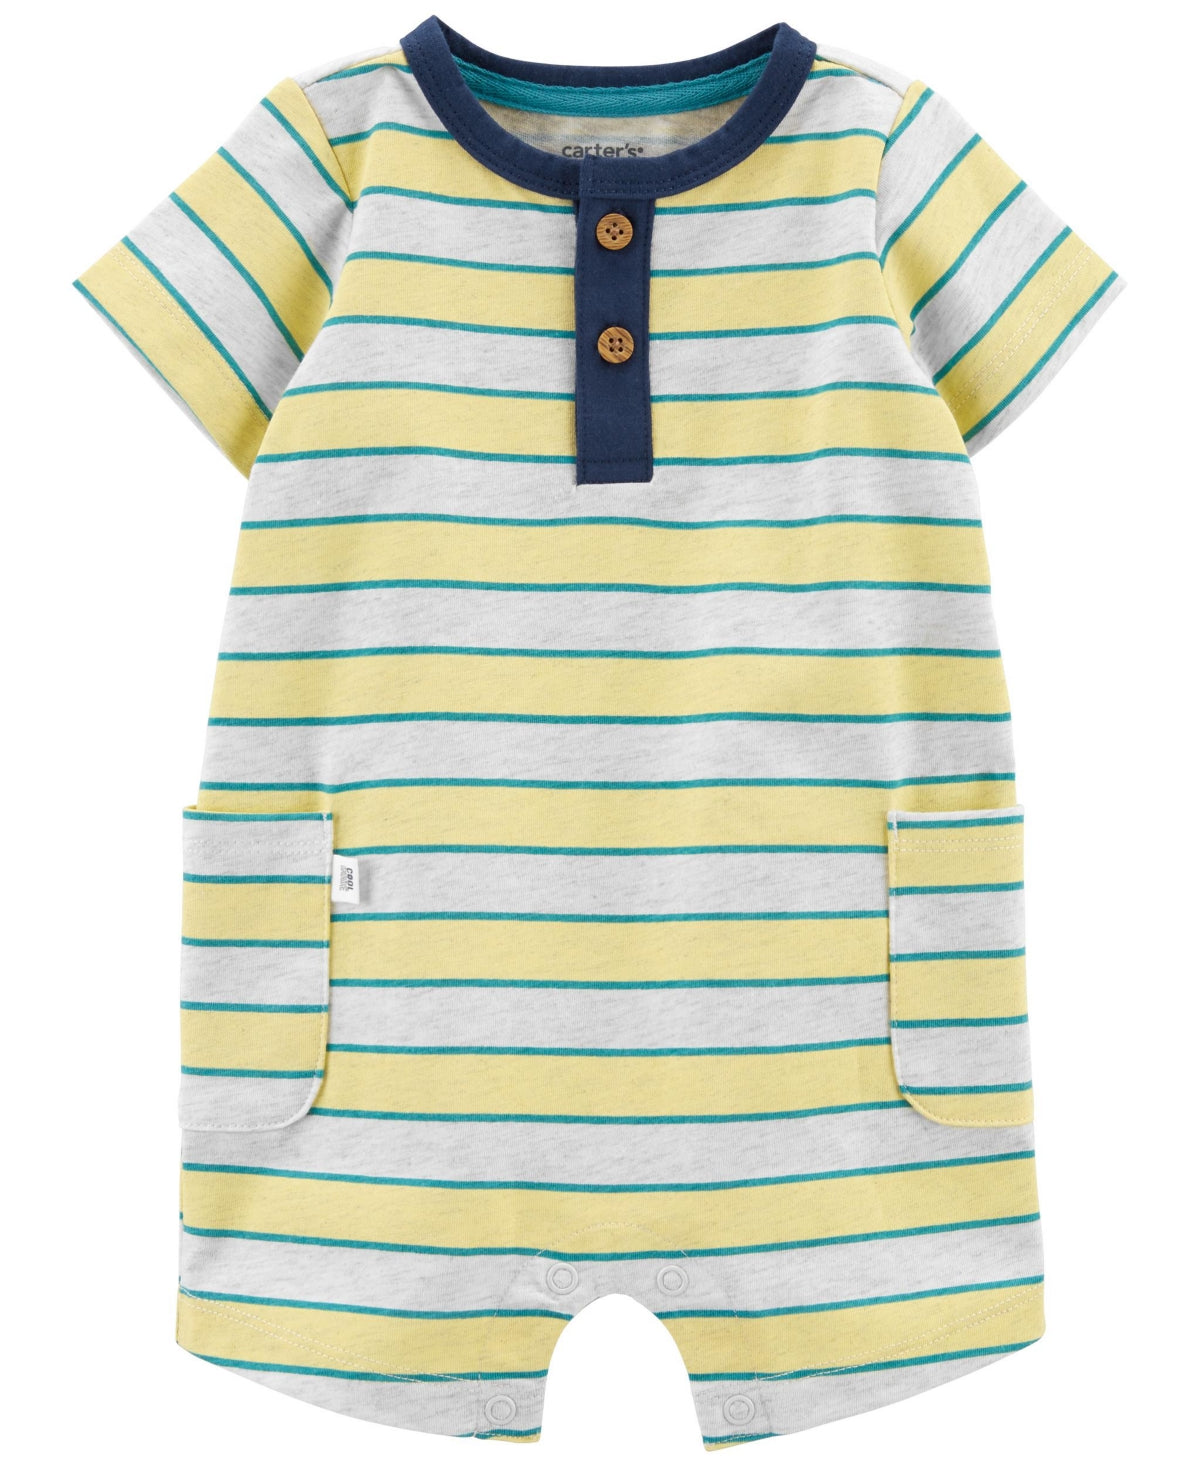 Carters Carters Baby Boys Striped Hen Yellow 6 months